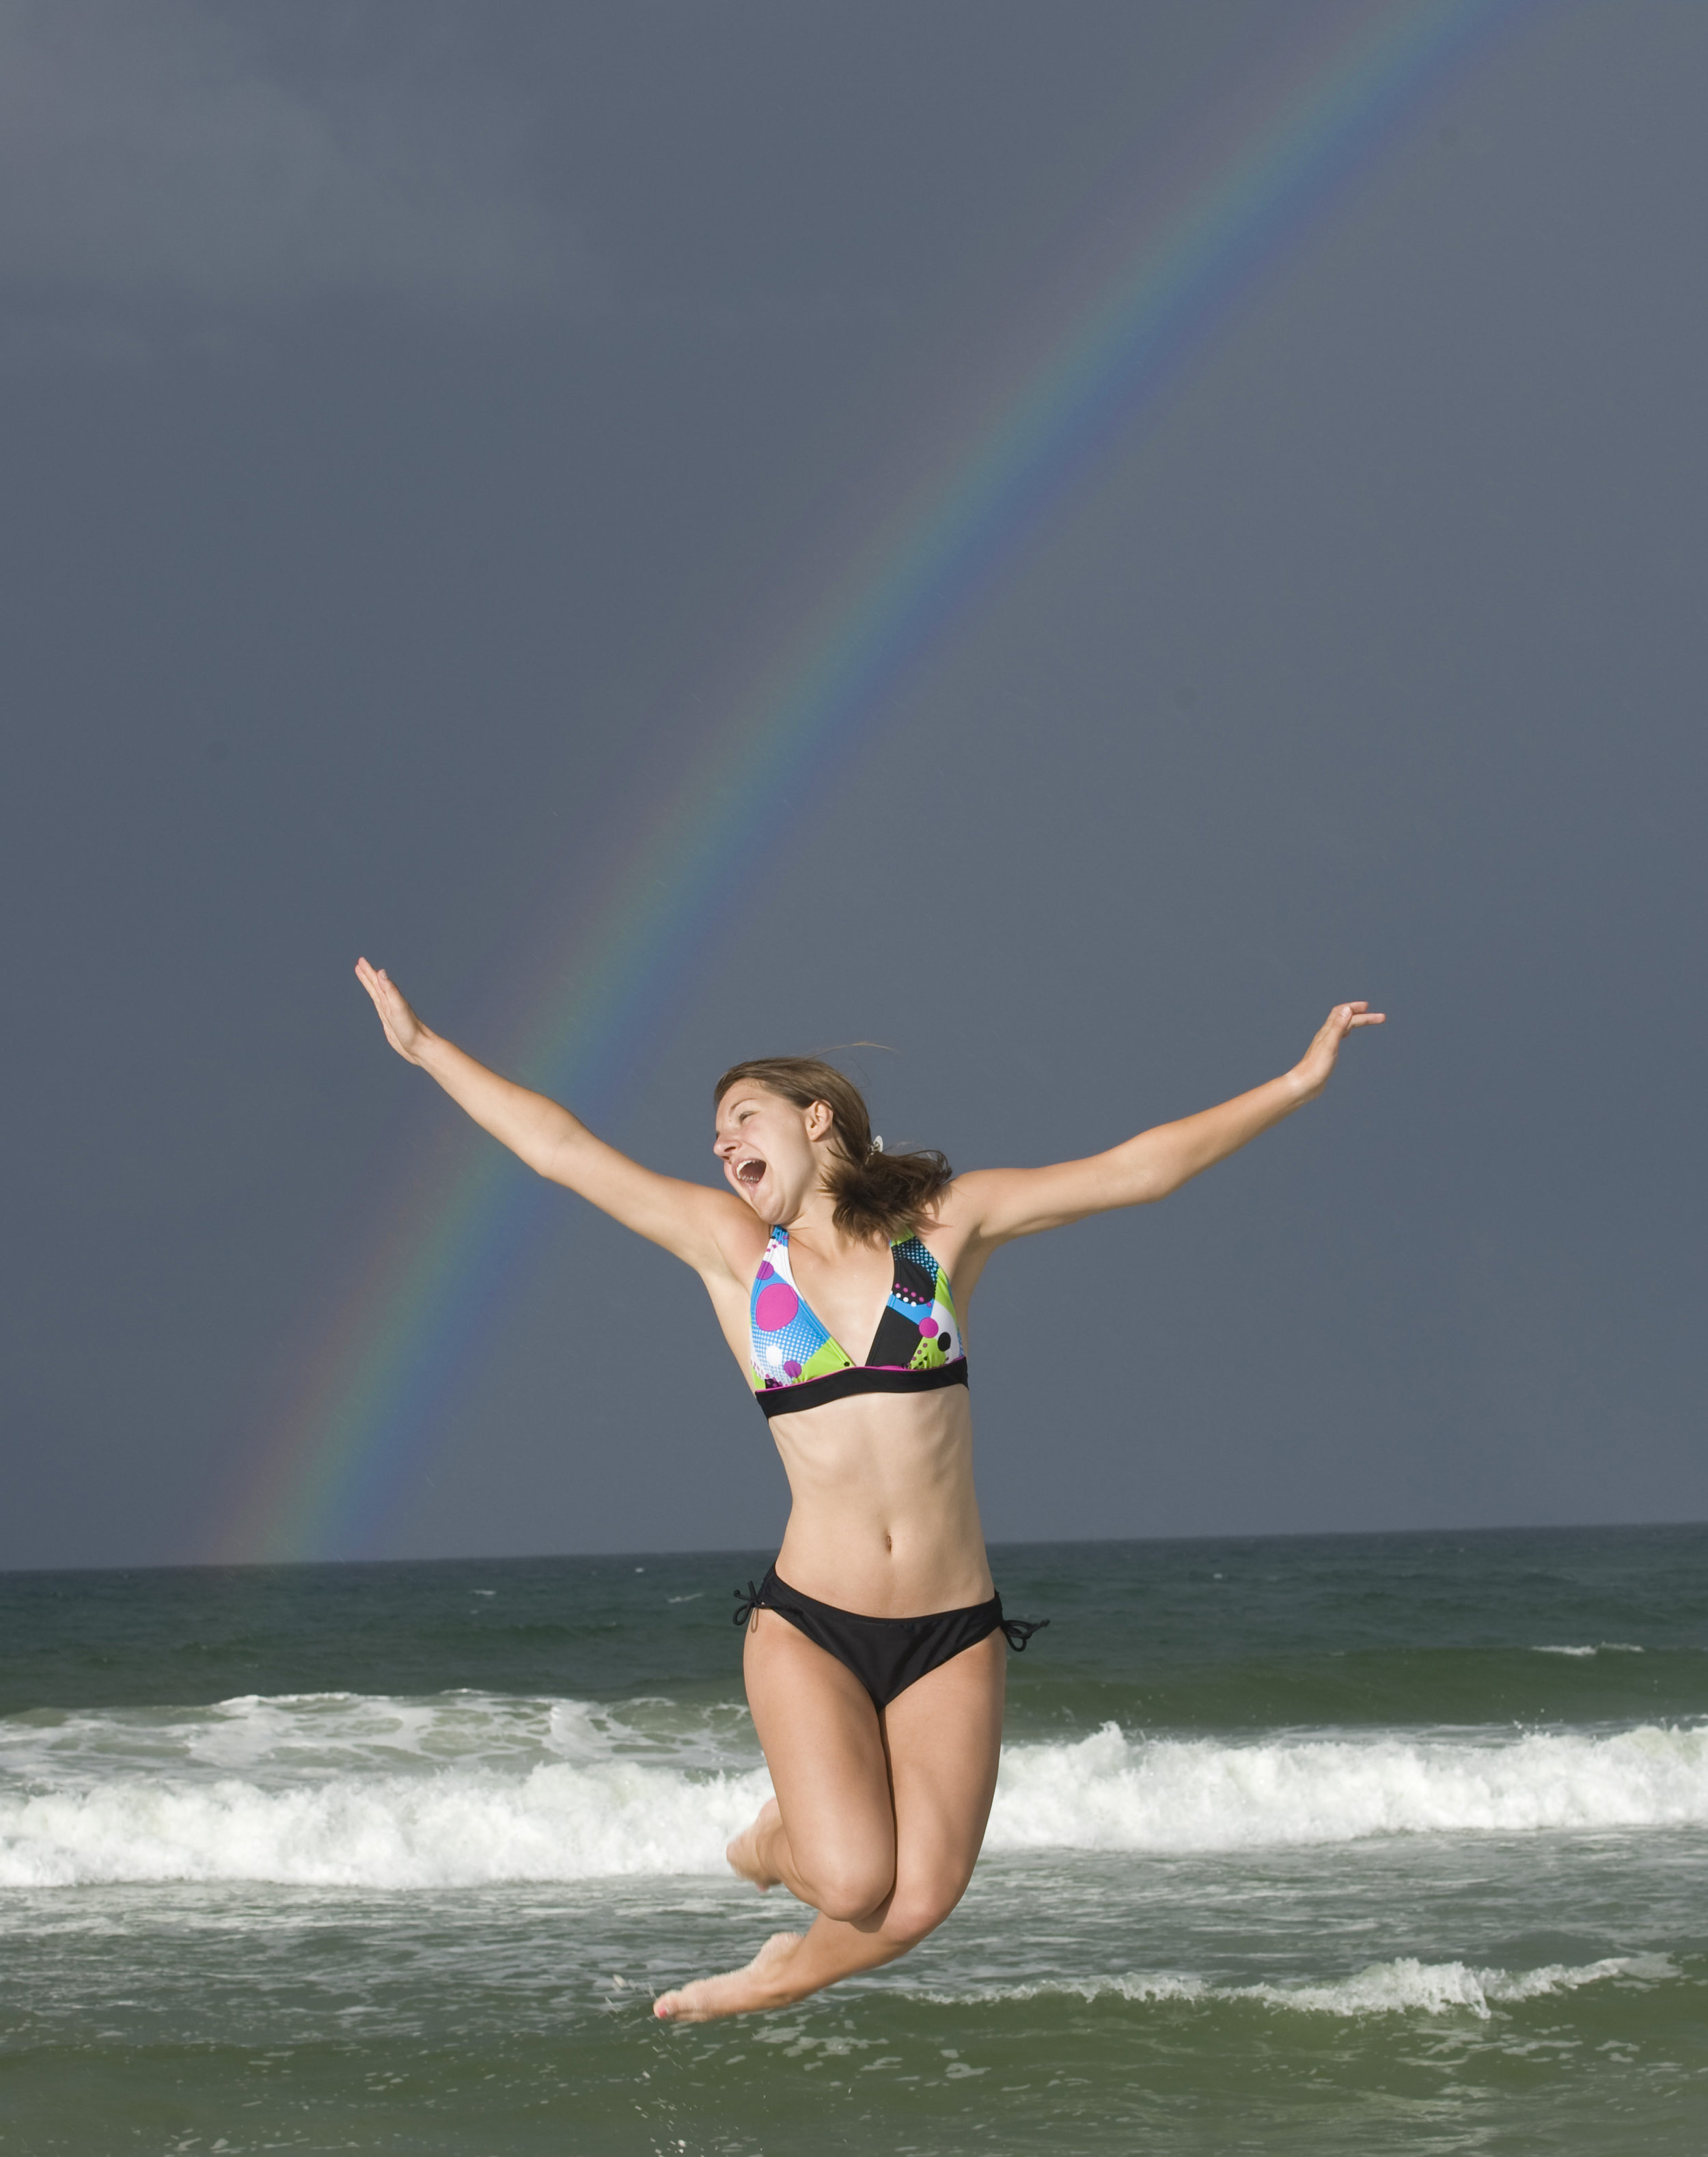 senior portrait girl at beach jumping in front of rainbow